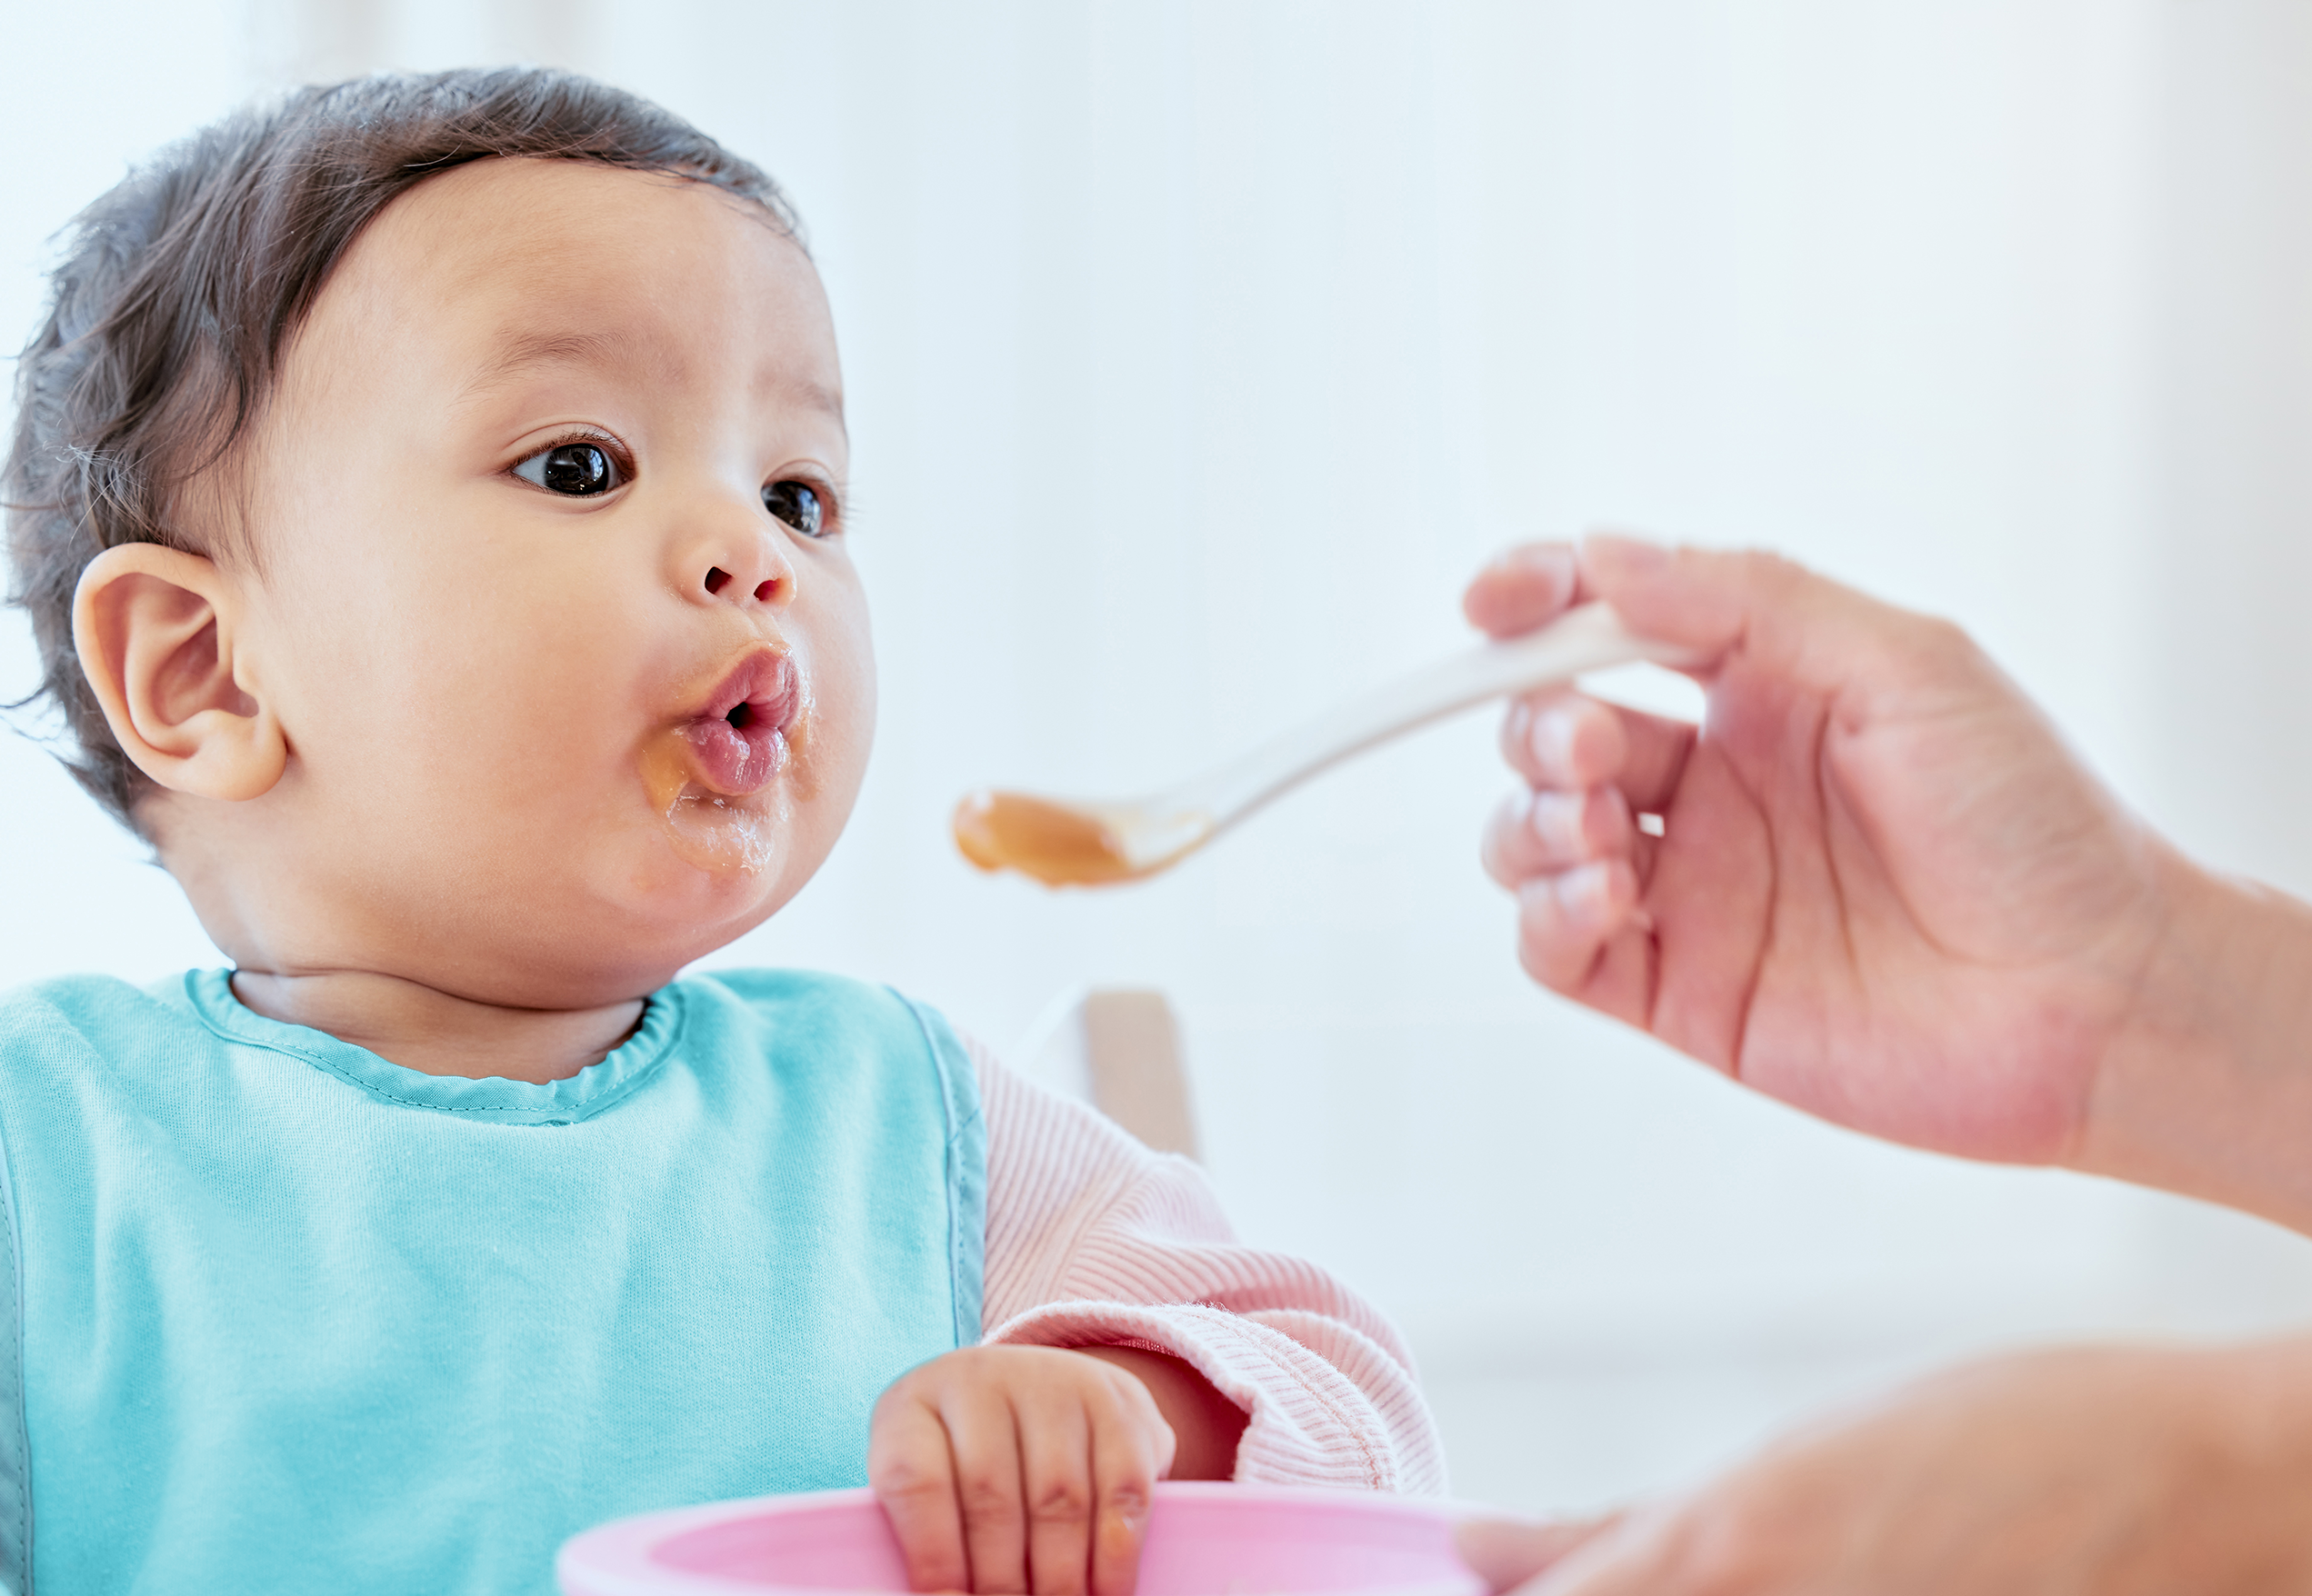 Baby food. A parent feeds an infant pureed baby food.